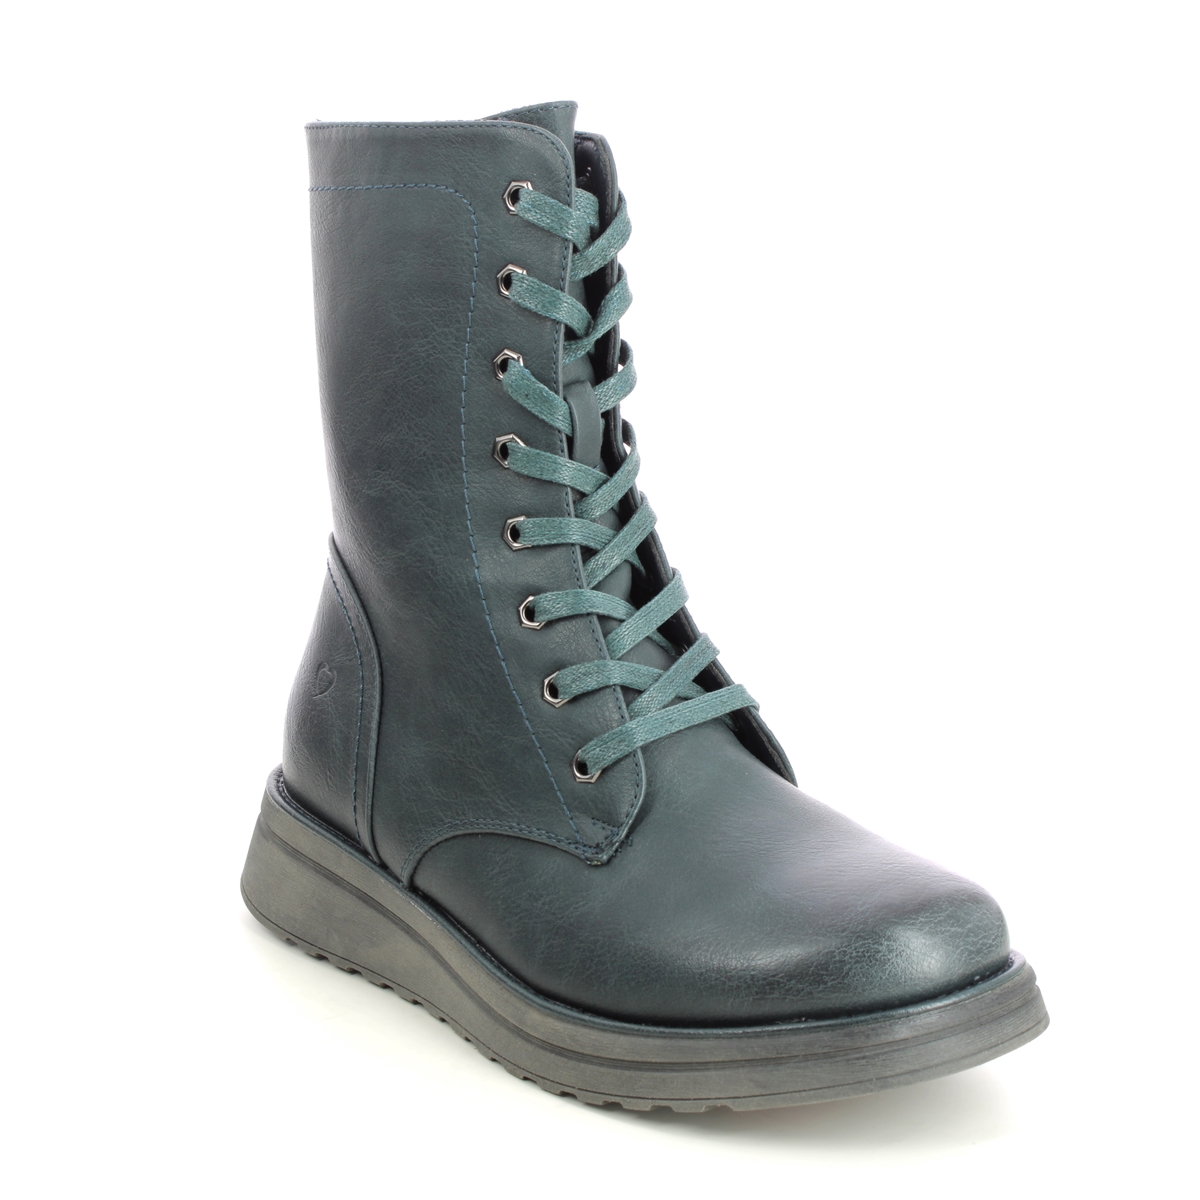 Heavenly Feet Martina Walker Teal Blue Womens Lace Up Boots 3509-73 In Size 7 In Plain Teal Blue